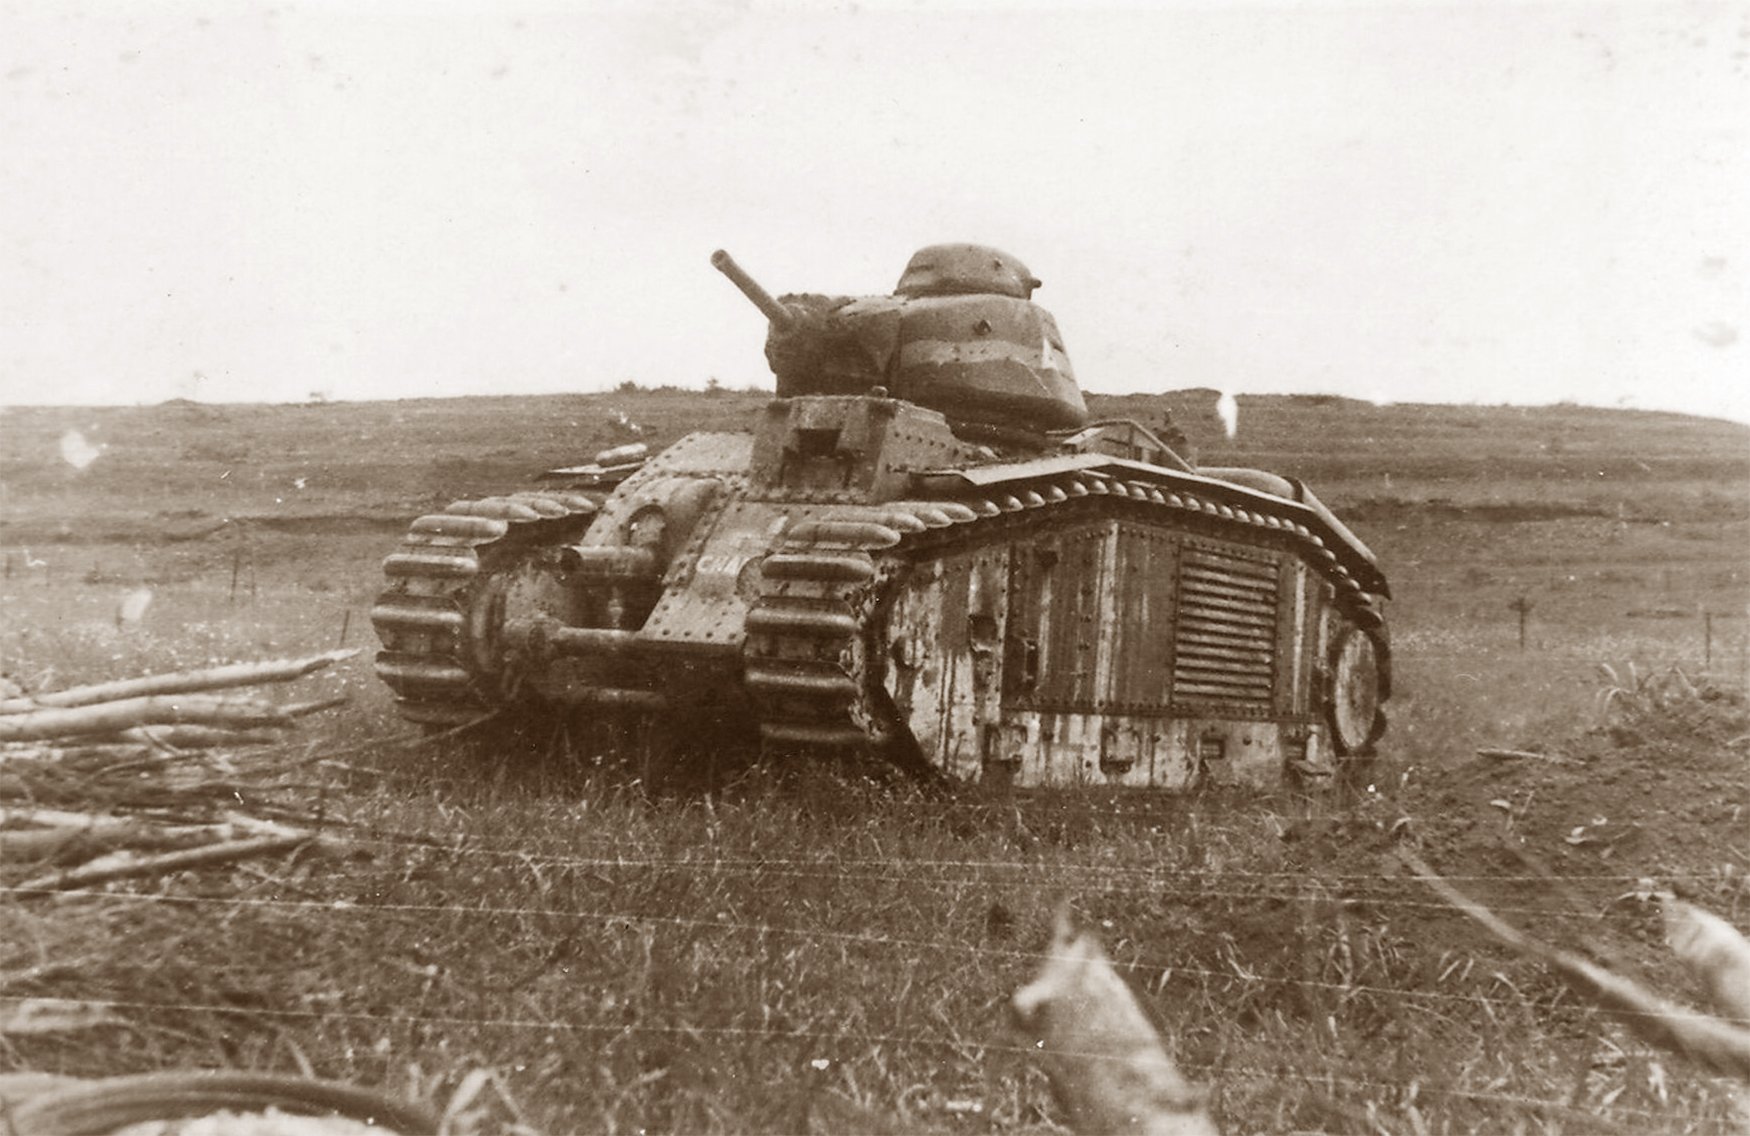 A black and white photograph of the French Char B1 bis tank "CHARENTE" from World War II, shown abandoned in an open field with its imposing form and battle damage, symbolizing the intense conflict of the era.